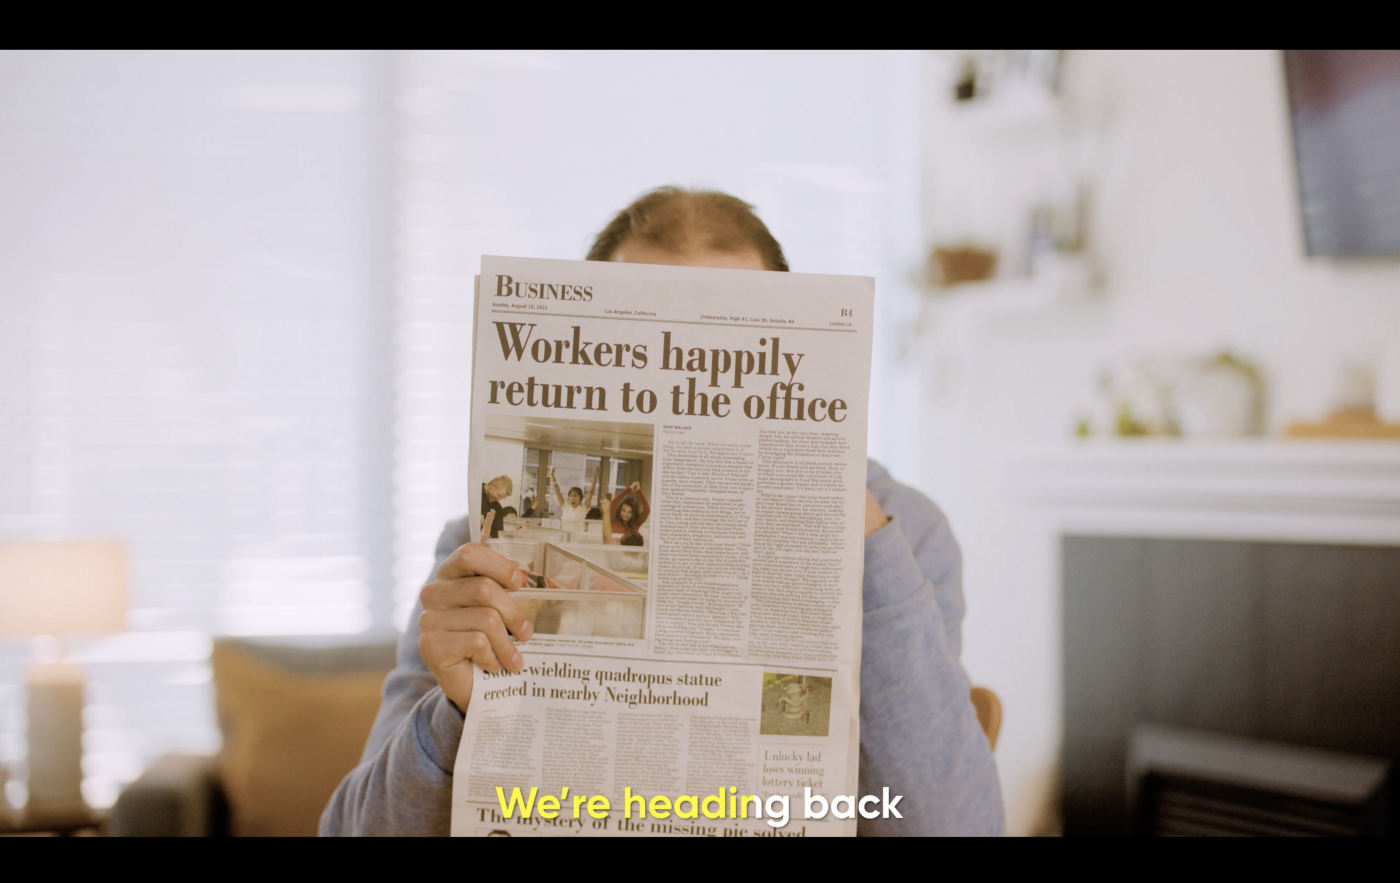 Screen grab from a video showing a man reading a newspaper with the headline "Workers happily return to the office"